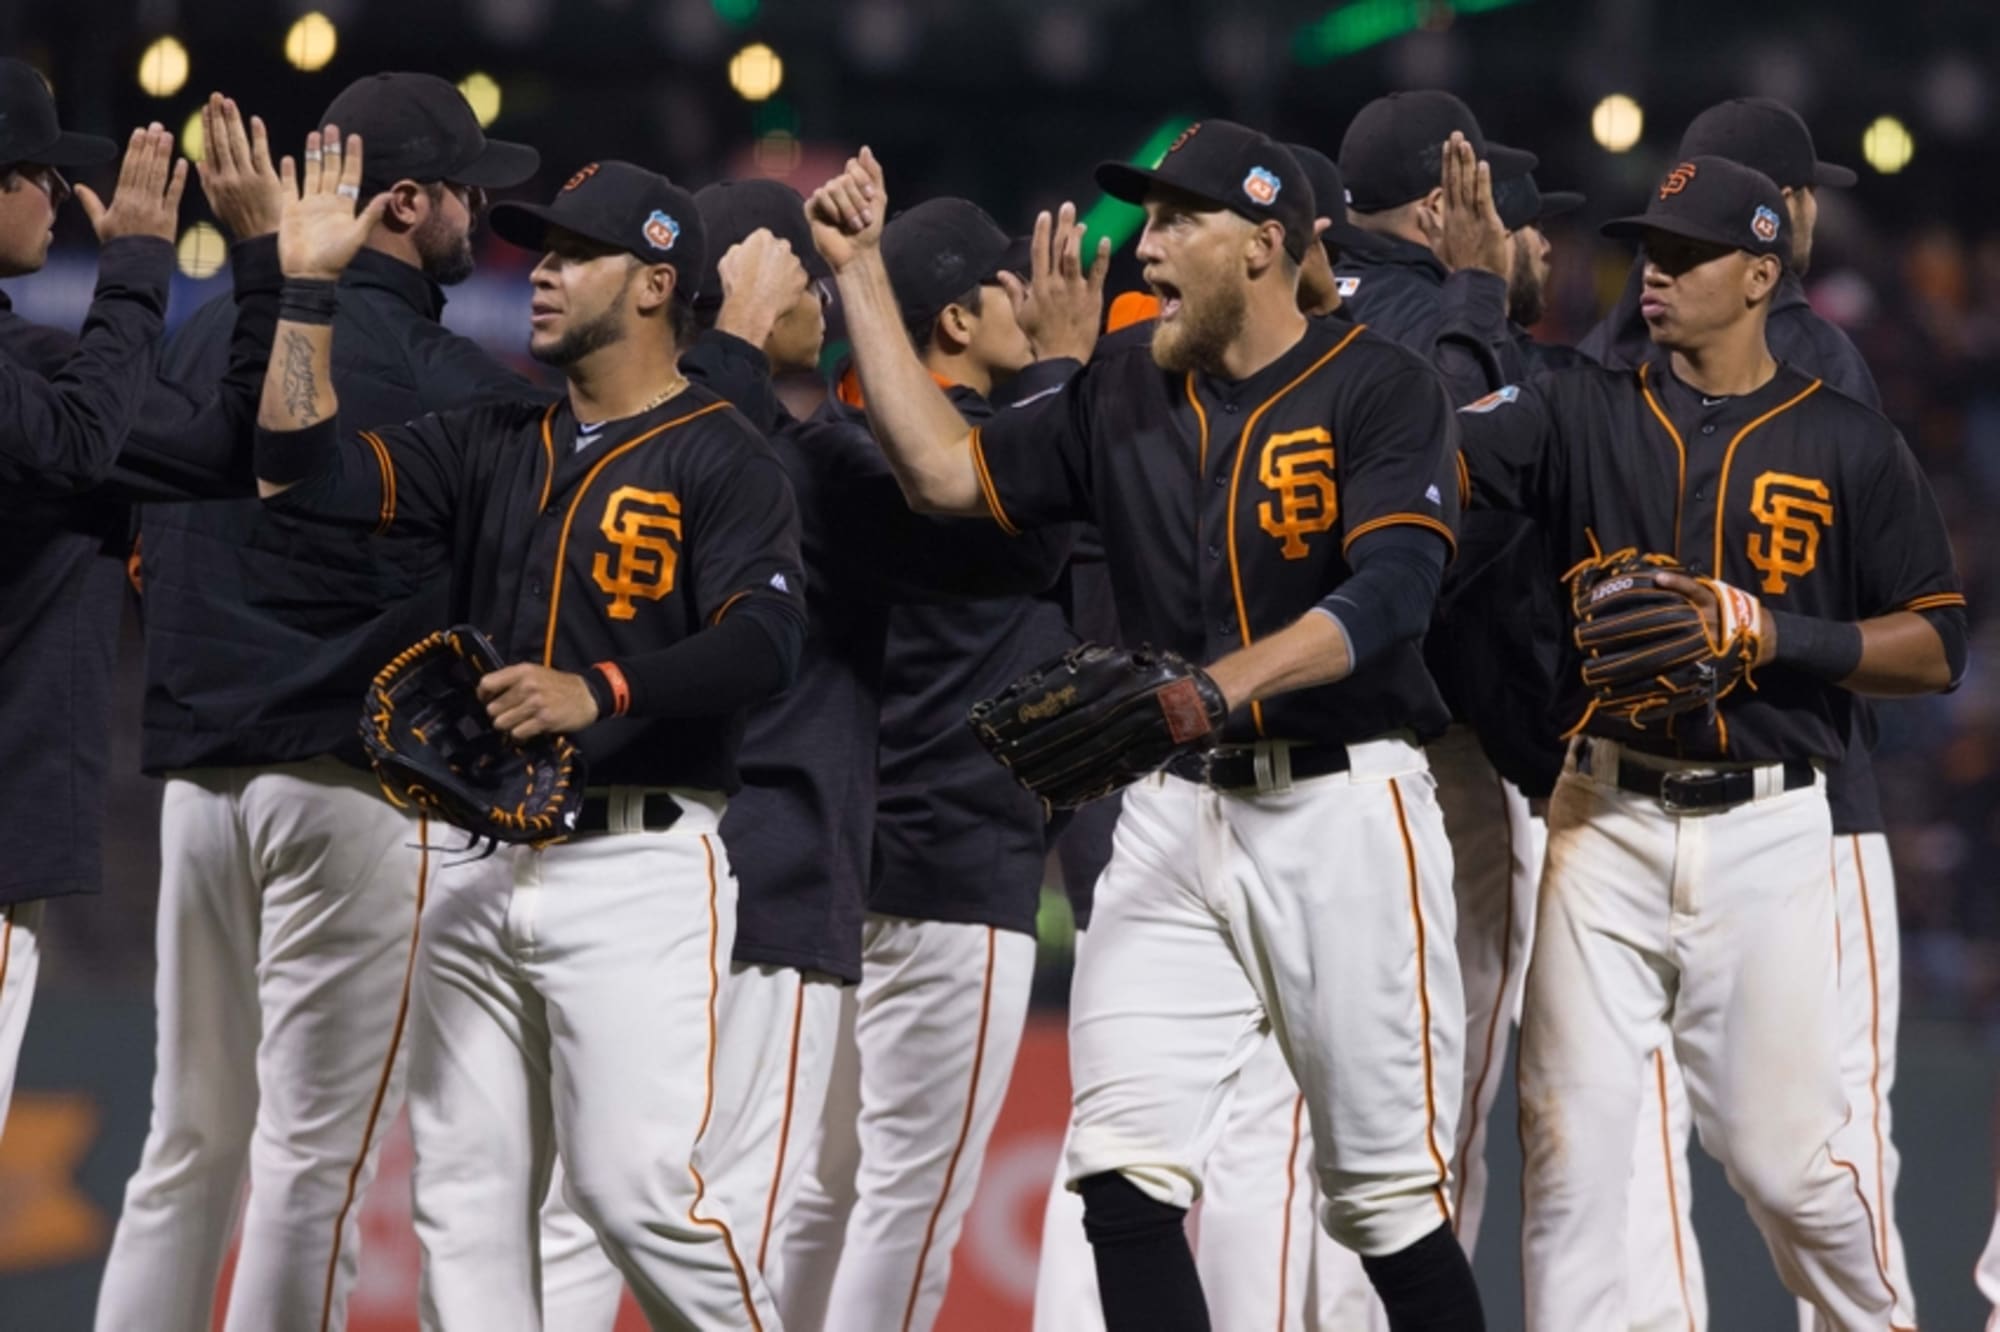 San Francisco Giants: A Look into the Crystal Ball at 2017's